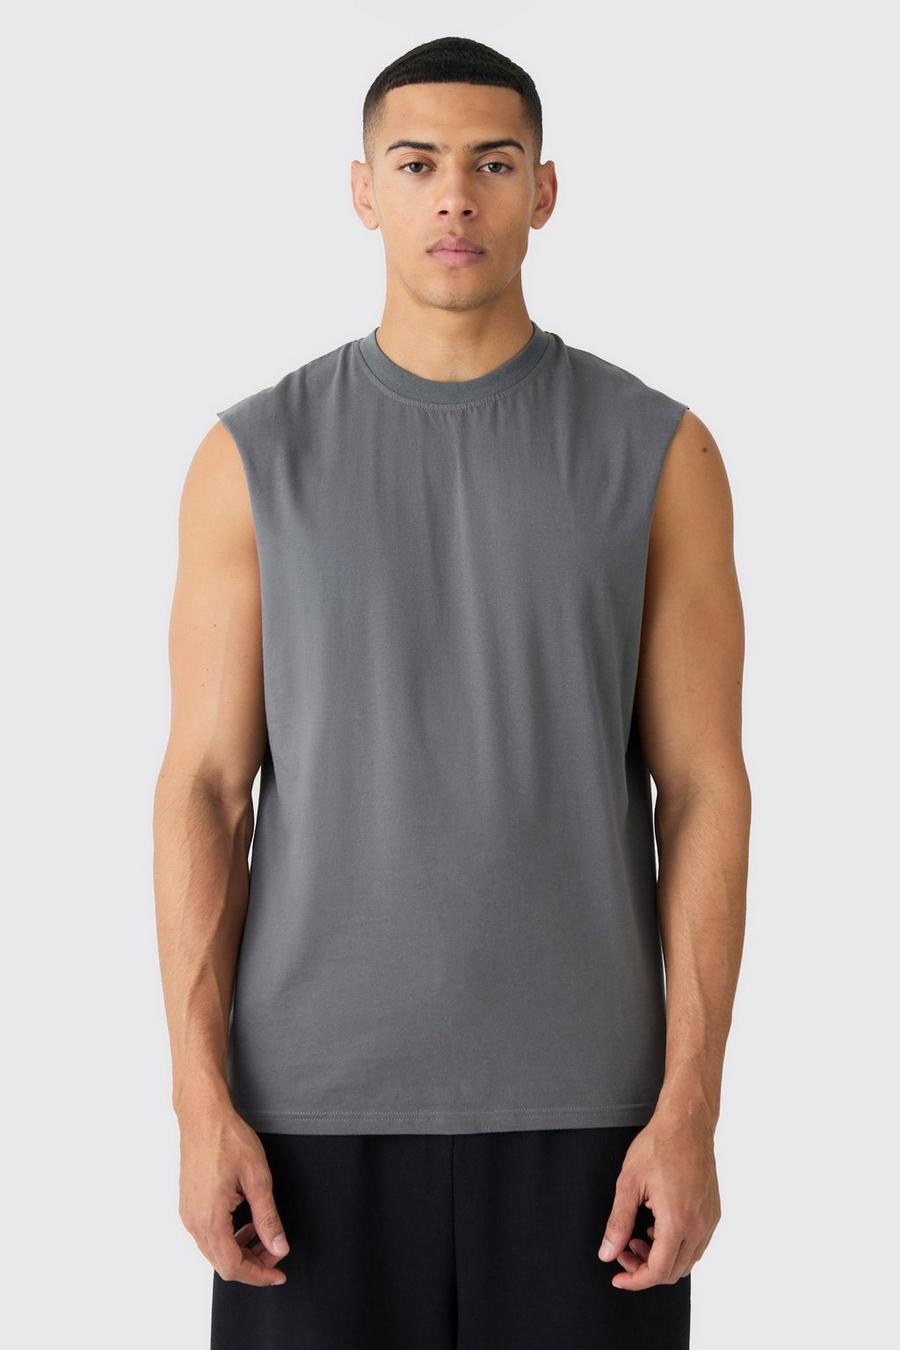 Charcoal Nicce mirage chest print t-shirt in black